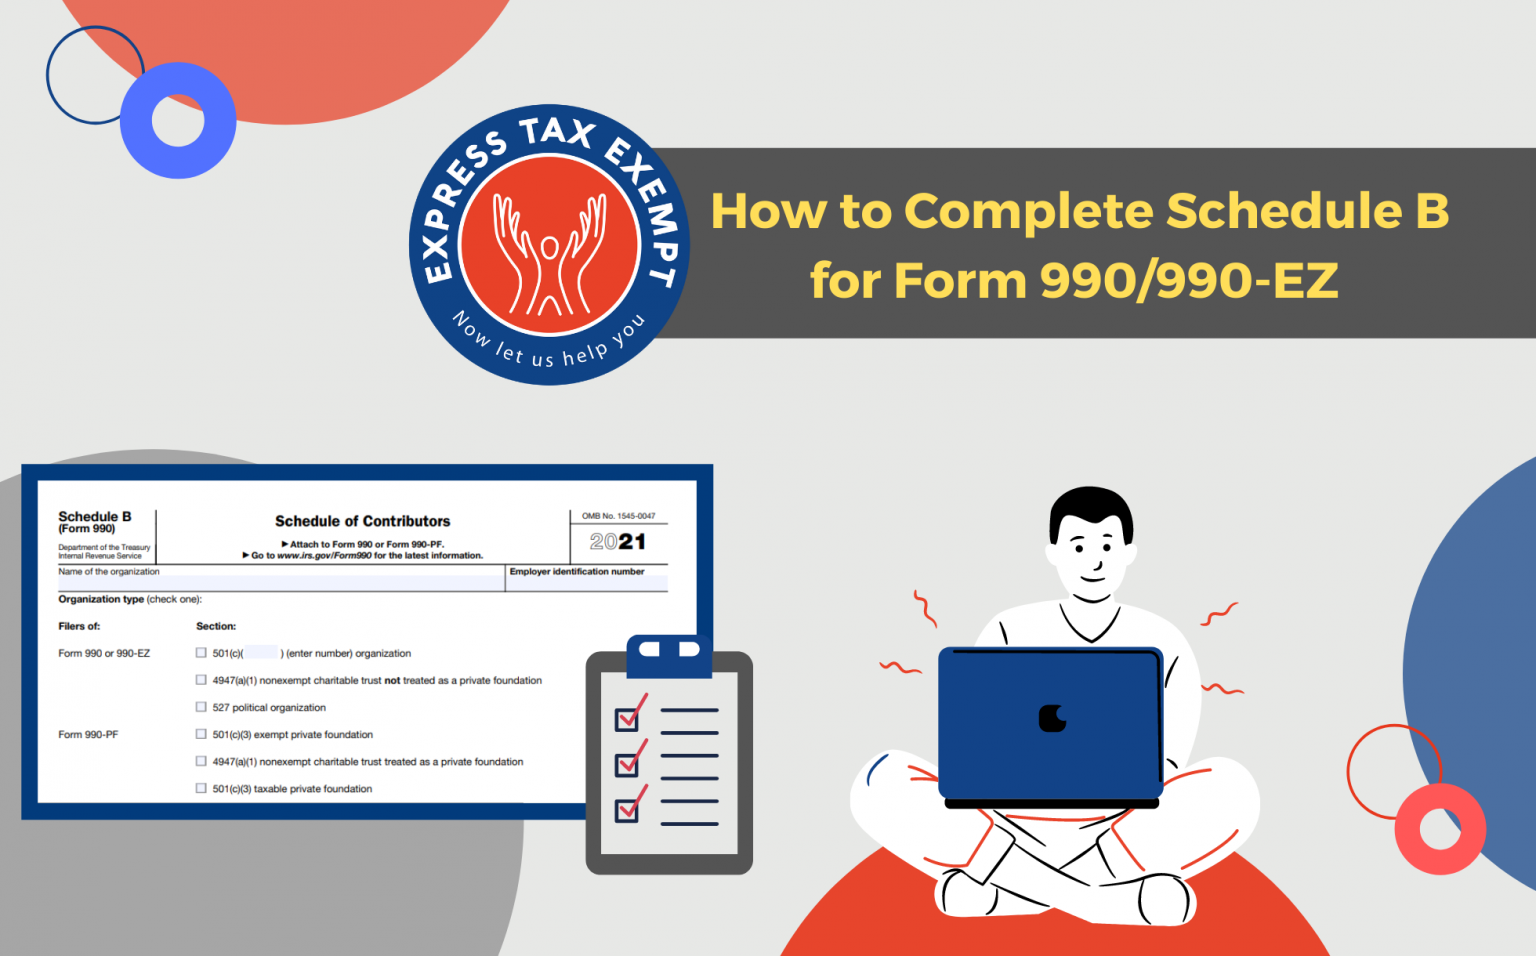 how-to-complete-schedule-b-for-form-990-990-ez